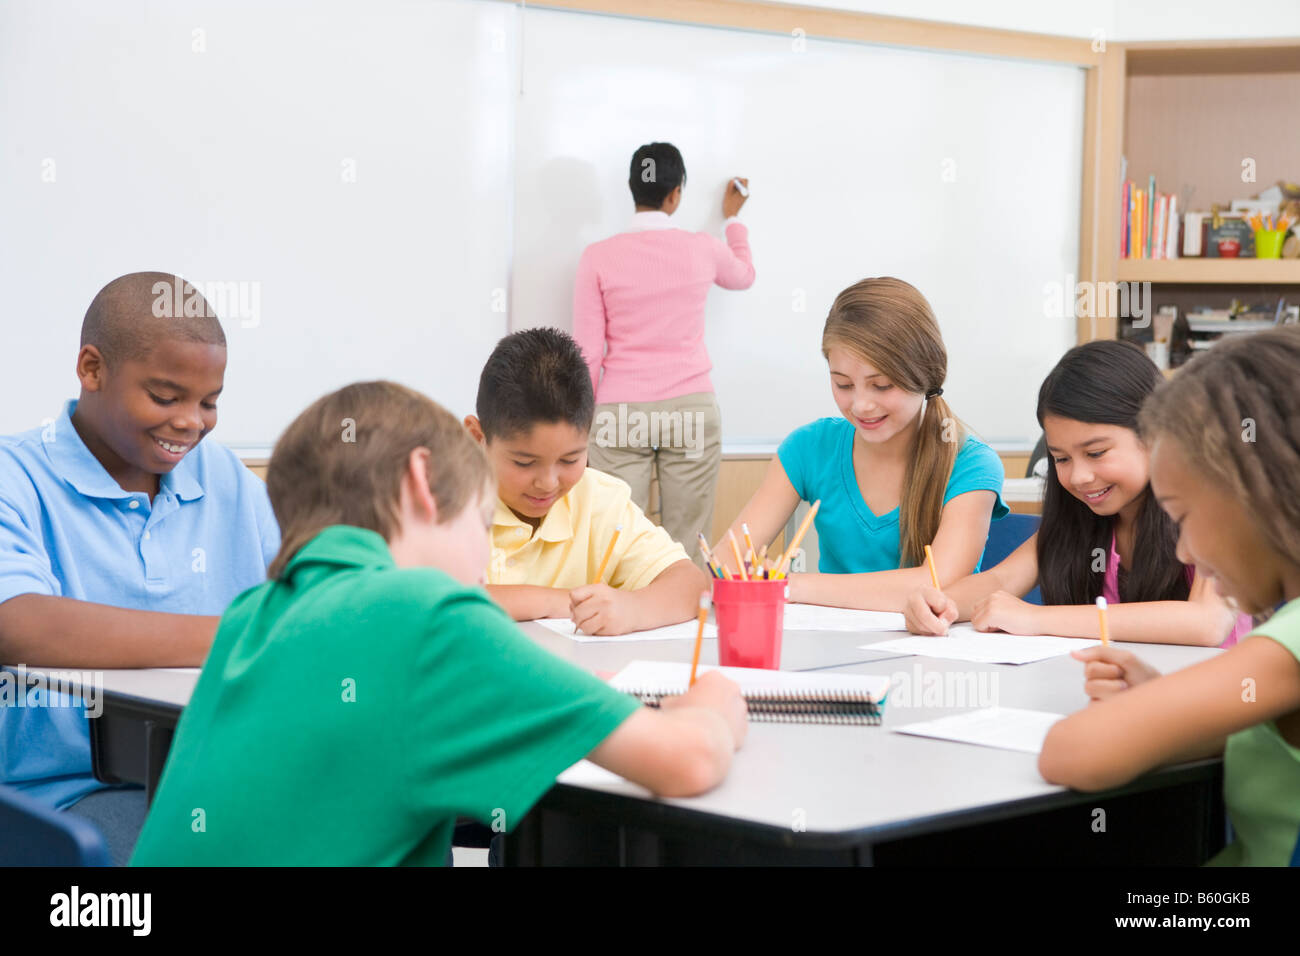 Students in class writing with teacher at front board Stock Photo